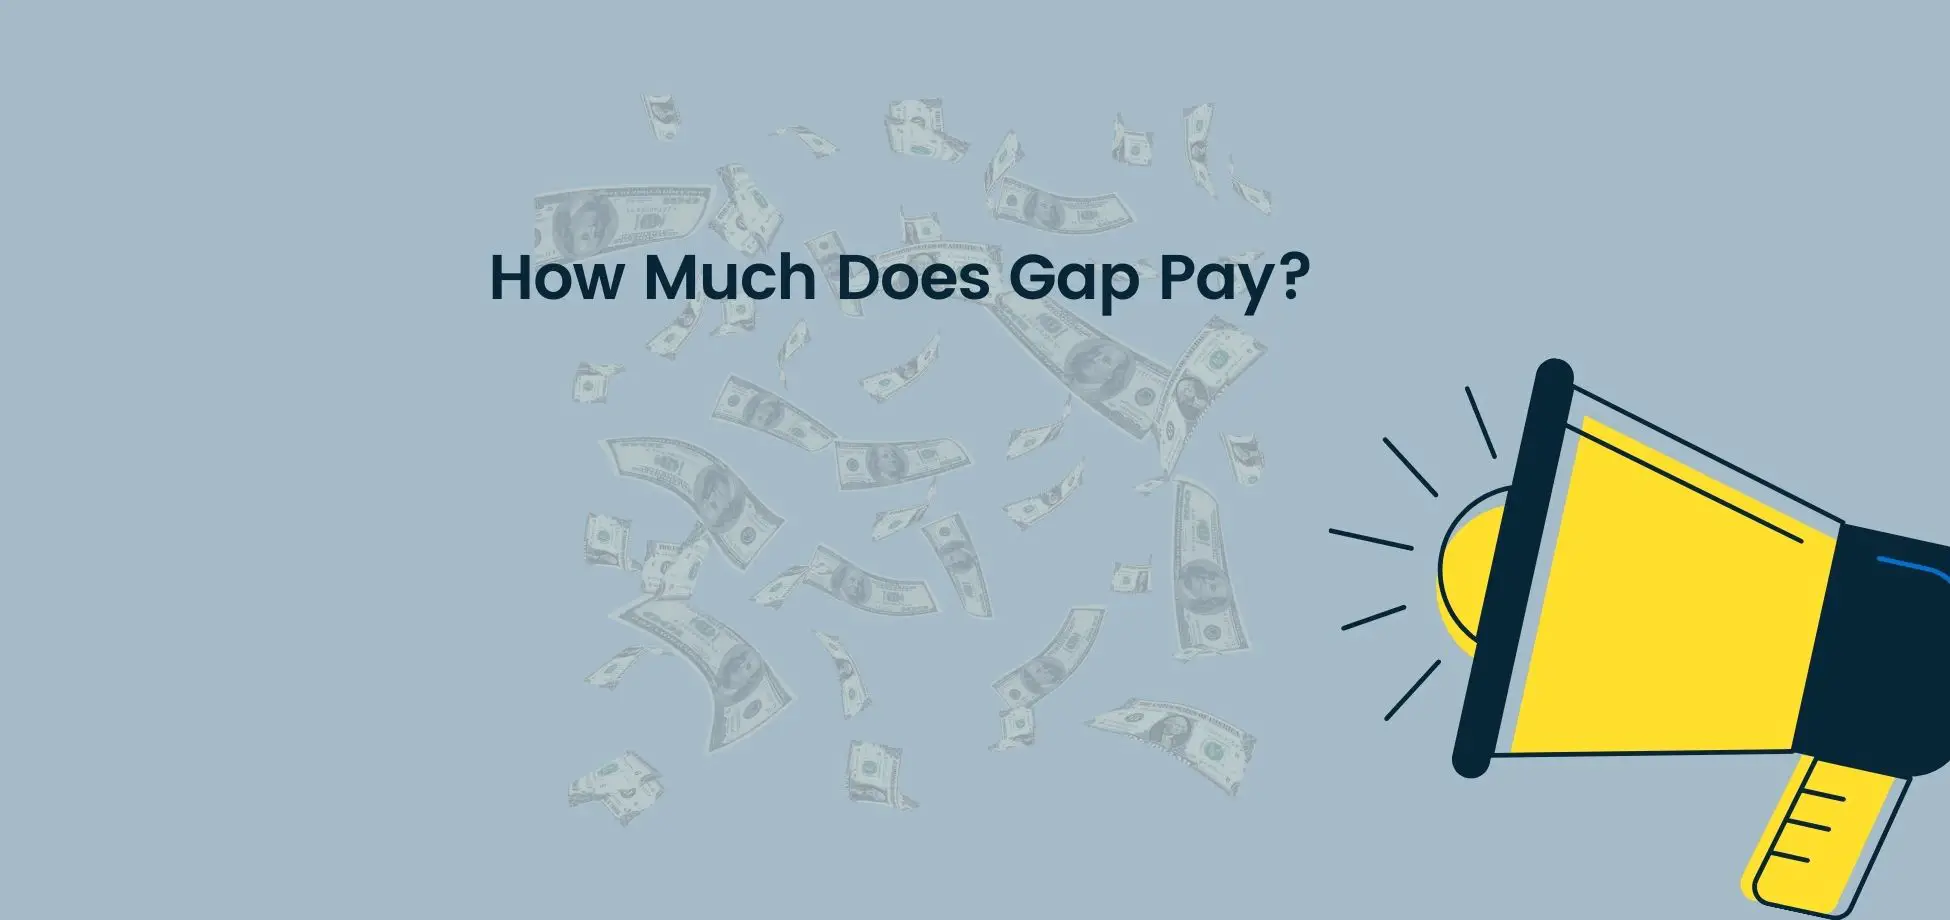 See the Gap starting pay here.